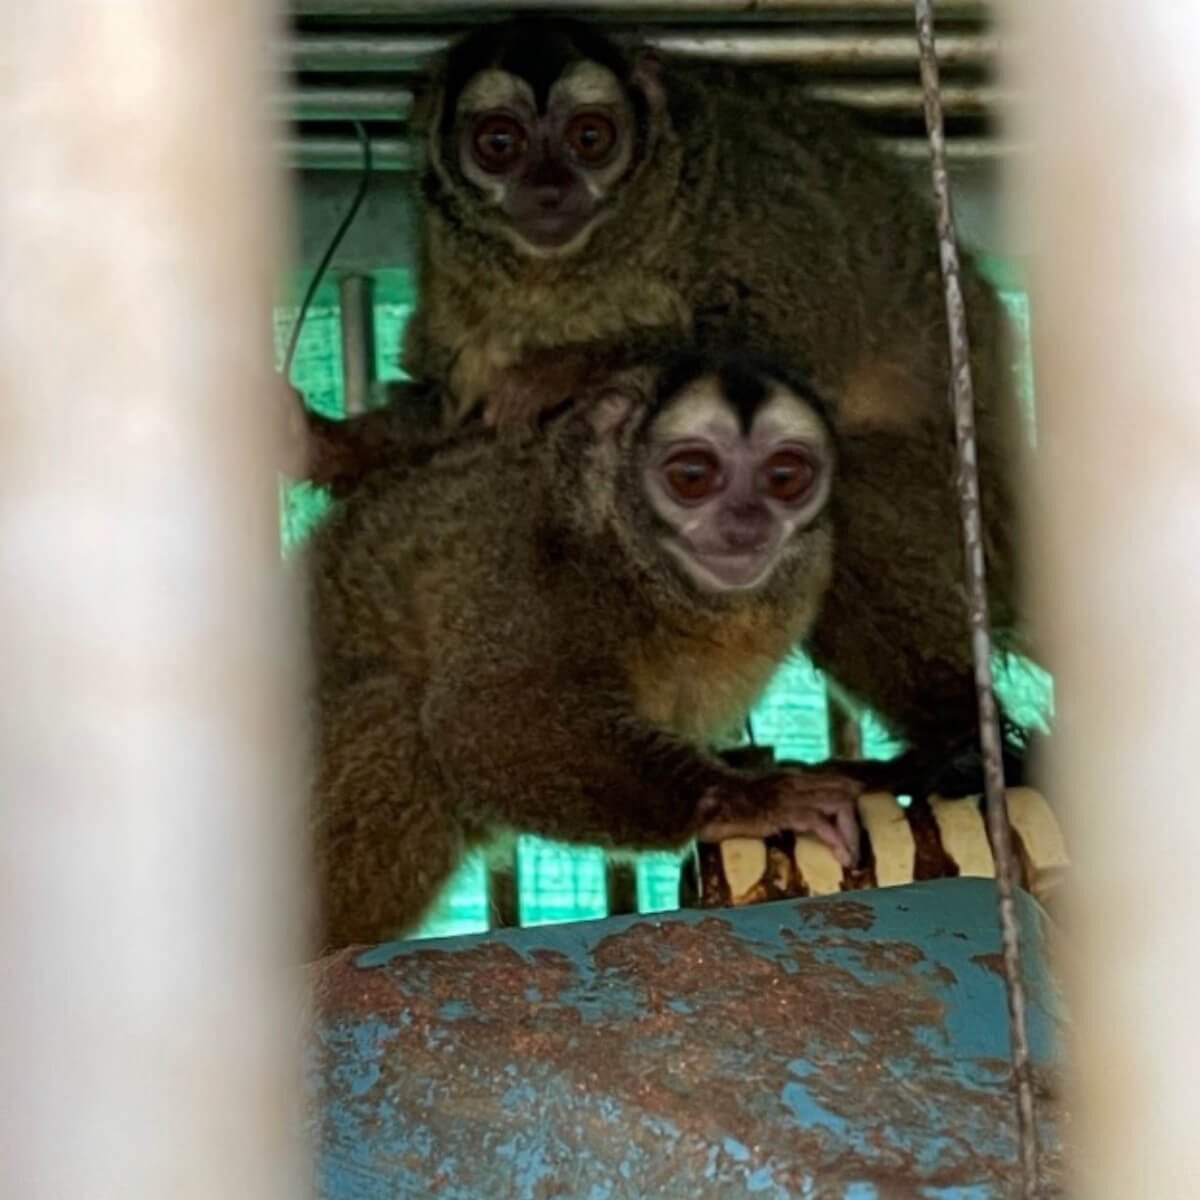 https://headlines.peta.org/wp-content/uploads/2022/11/VIV-Colombia-Fundacion-Centro-de-Primates-FUCEP-Aotus-monkeys-on-a-soiled-corrugated-pipe-nest-beside-another-feces-caked-nests-PO-VS-e1668634991928.jpg